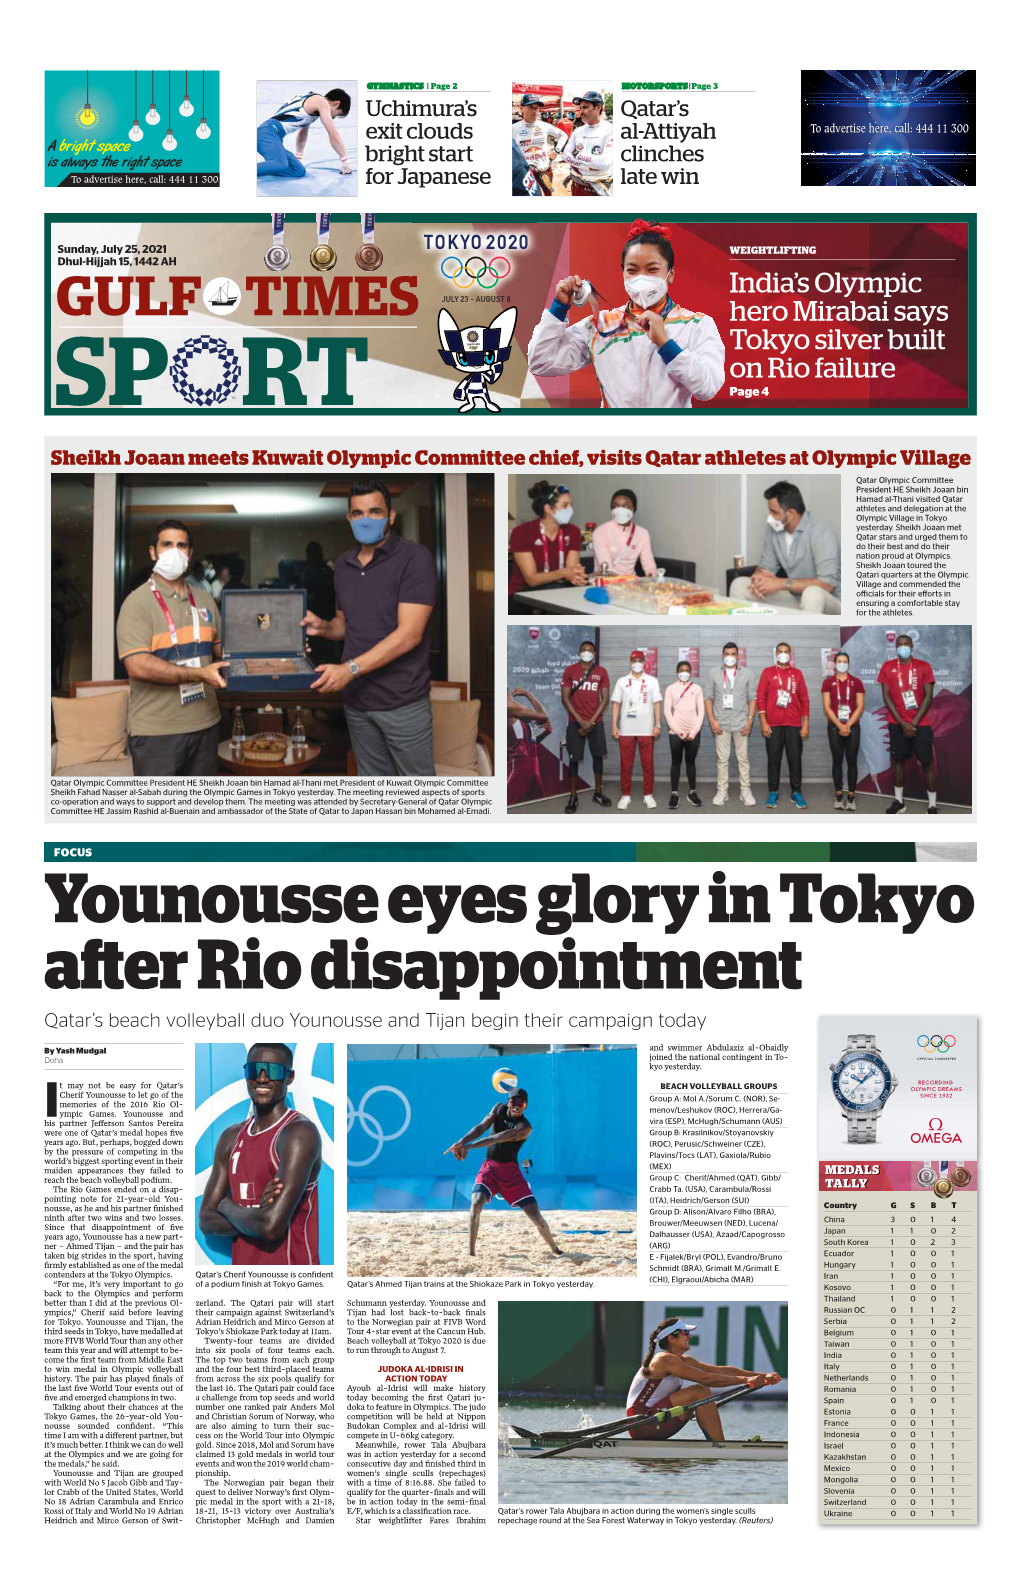 SPORTSOTORSPORTS | Page 3 Uchimura’S Qatar’S Exit Clouds Al-Attiyah Bright Start Clinches for Japanese Late Win